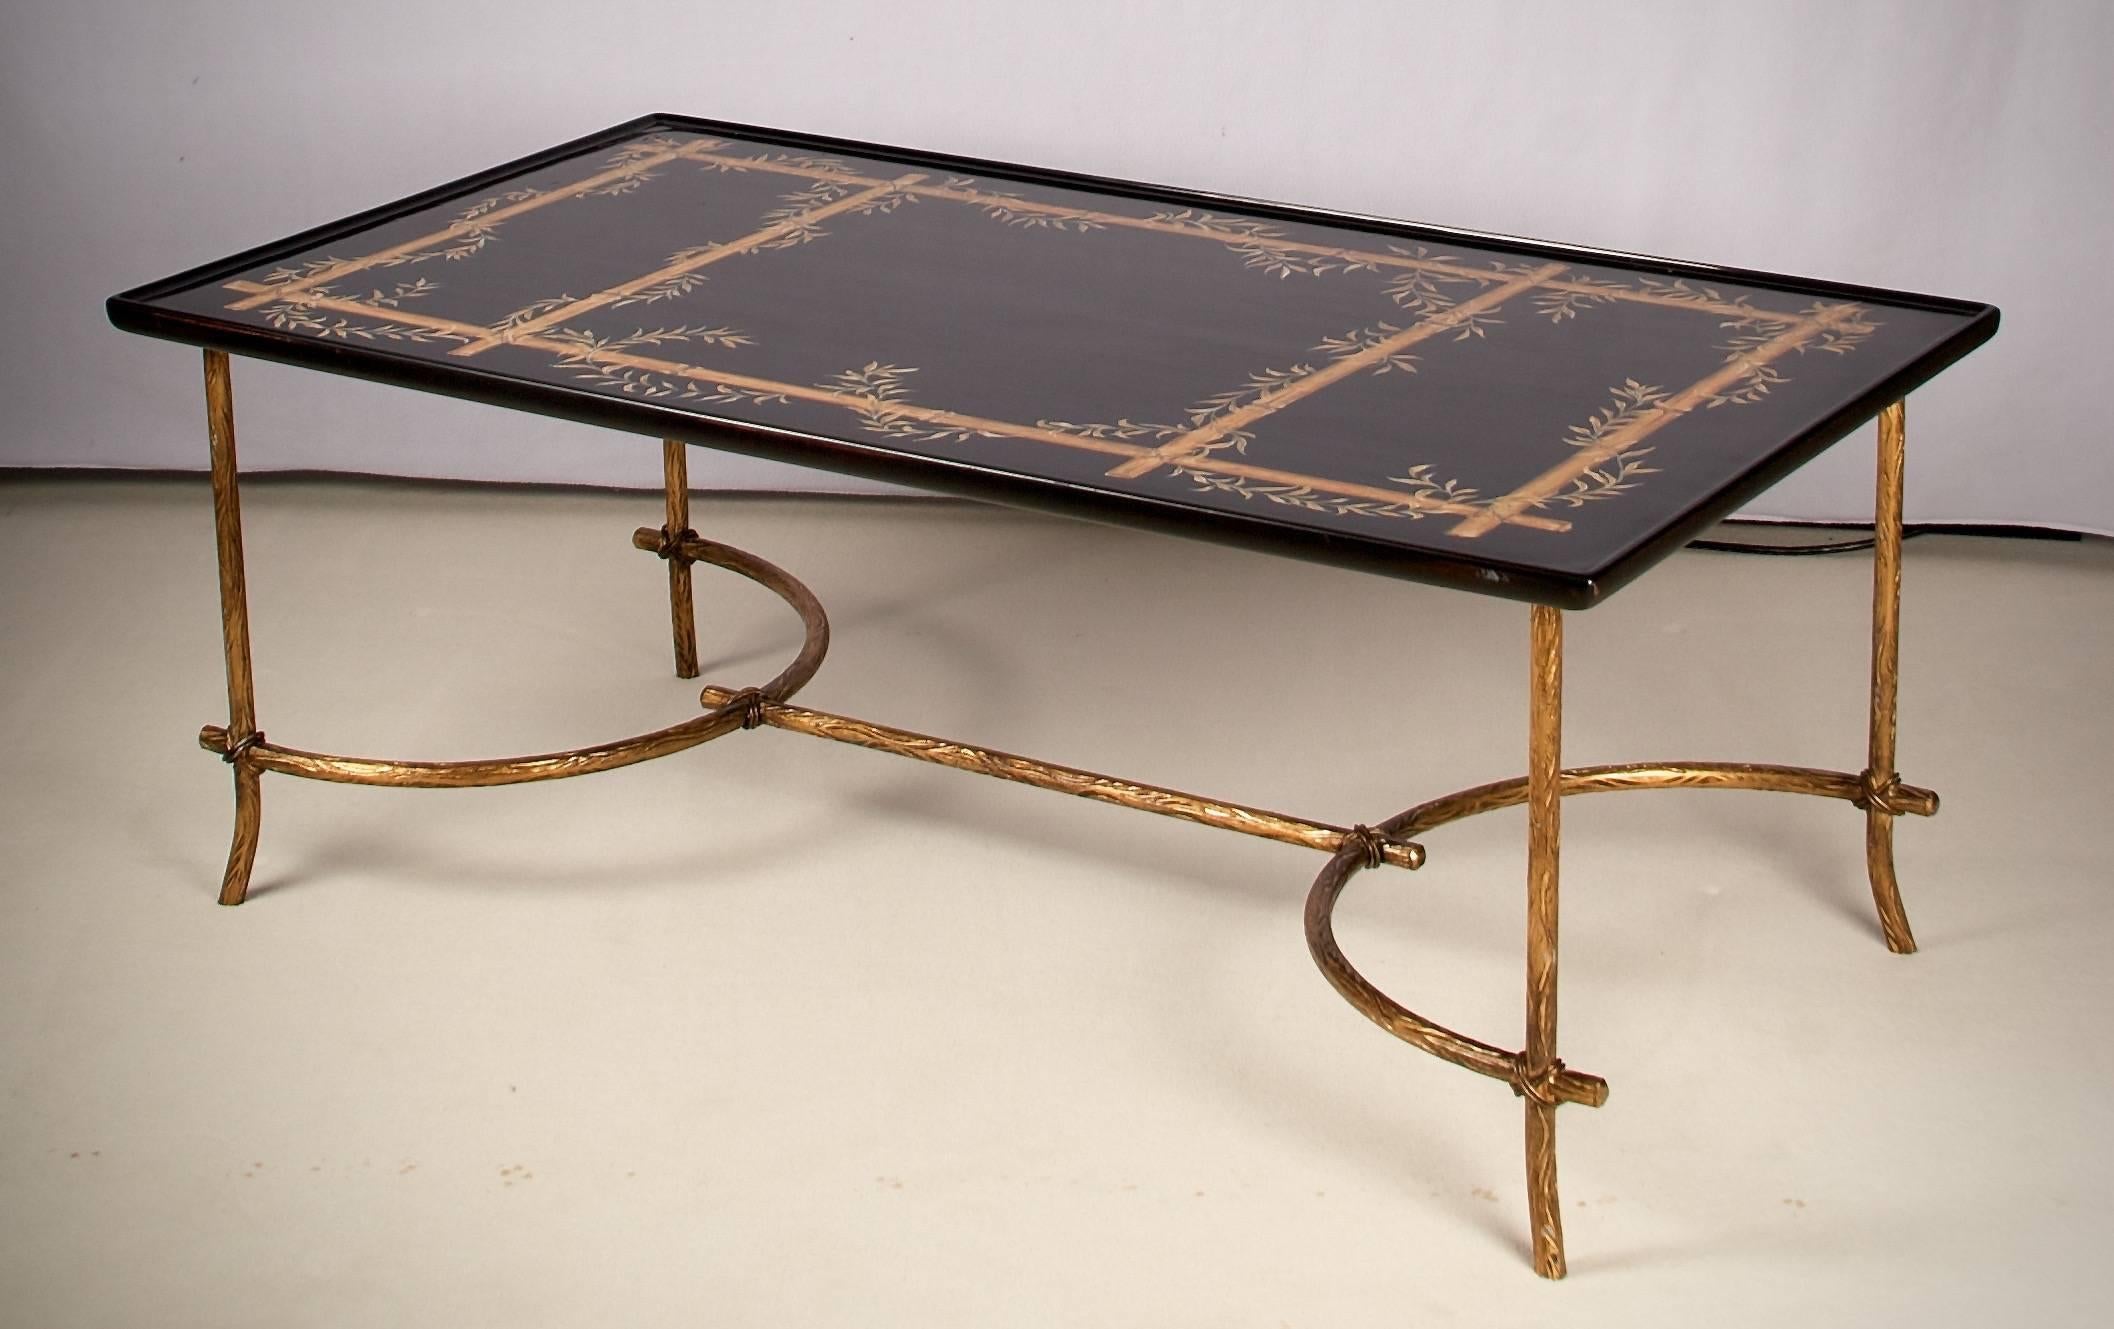 American Modern Chinoiserie Decorated Coffee Table with Faux Gild Metal Legs